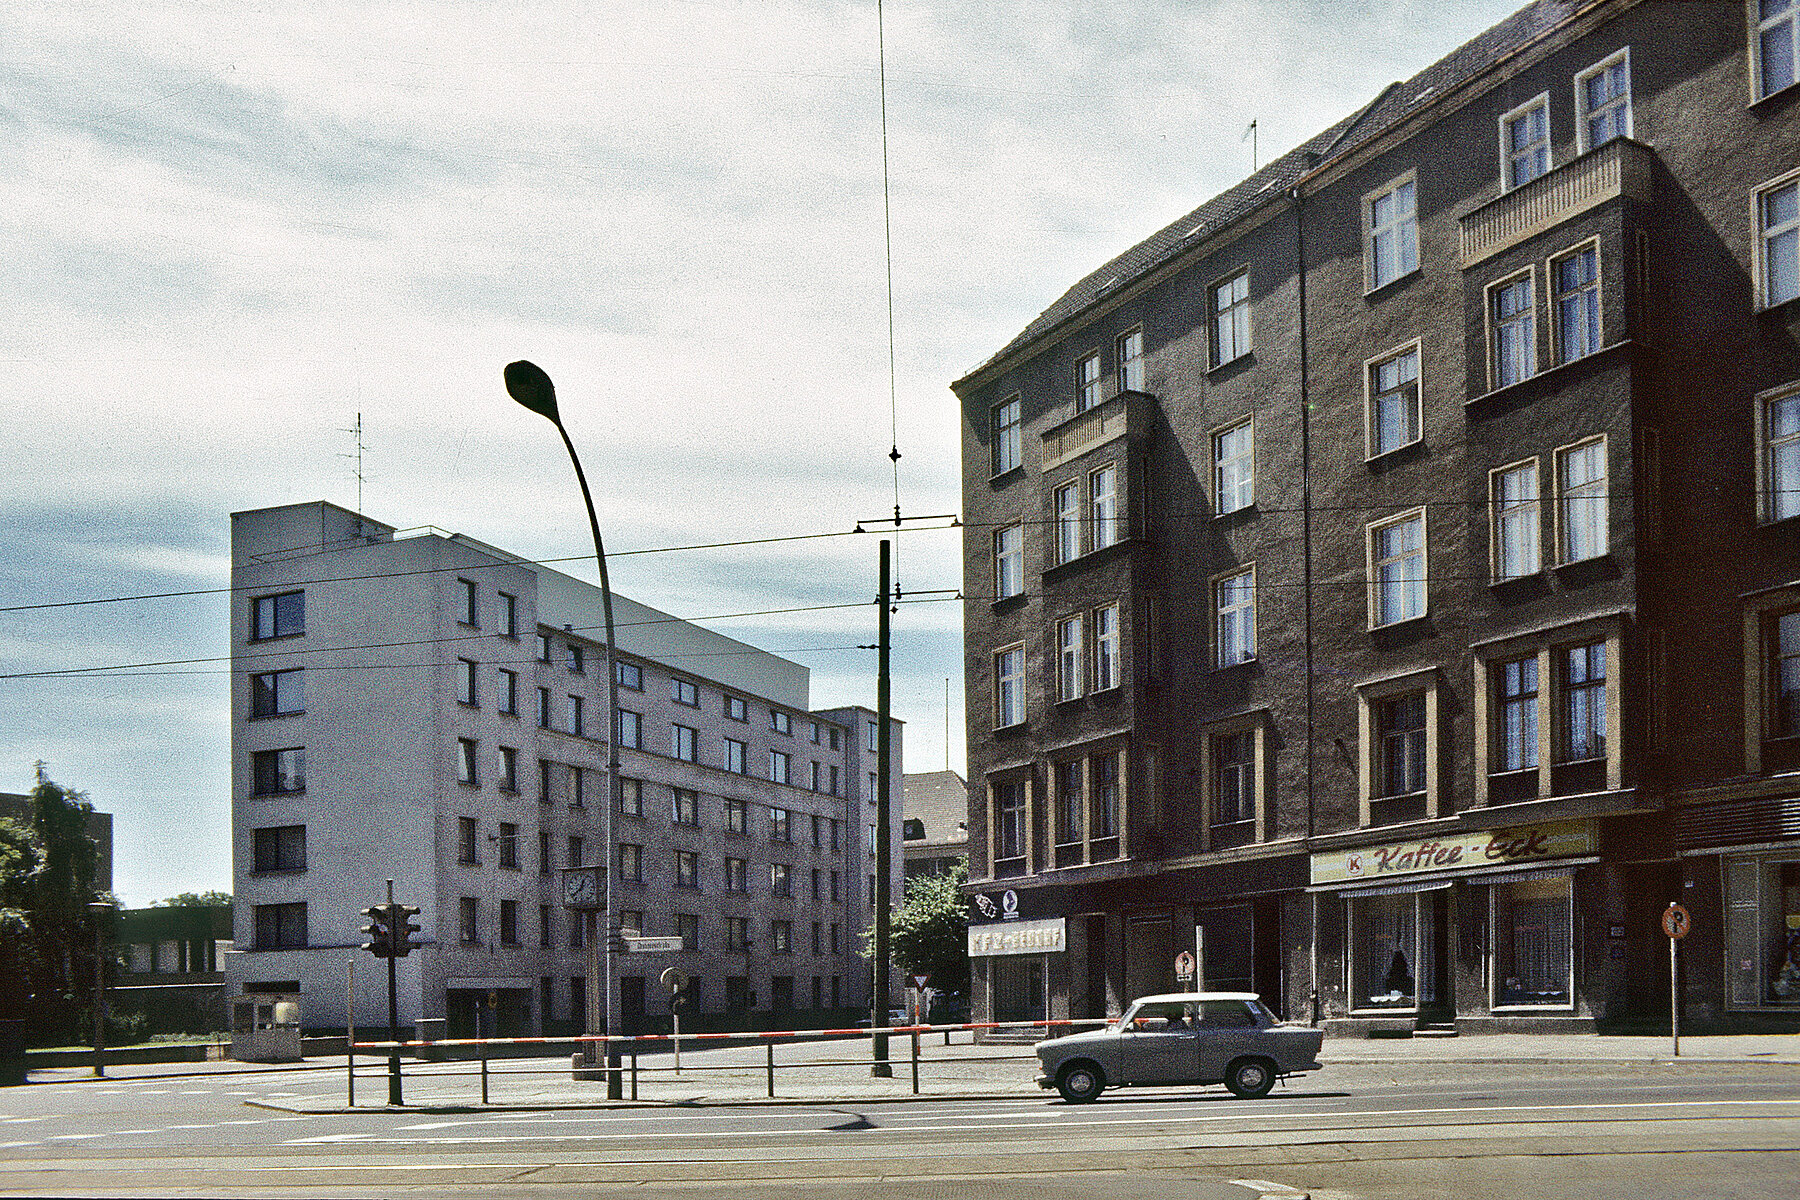 On the left is the building of the Ständige Vertretung (Permanent Representation of the Federal Republic of Germany in the GDR). On the right is a building with a coffee shop and a Trabi driving by in the foreground.